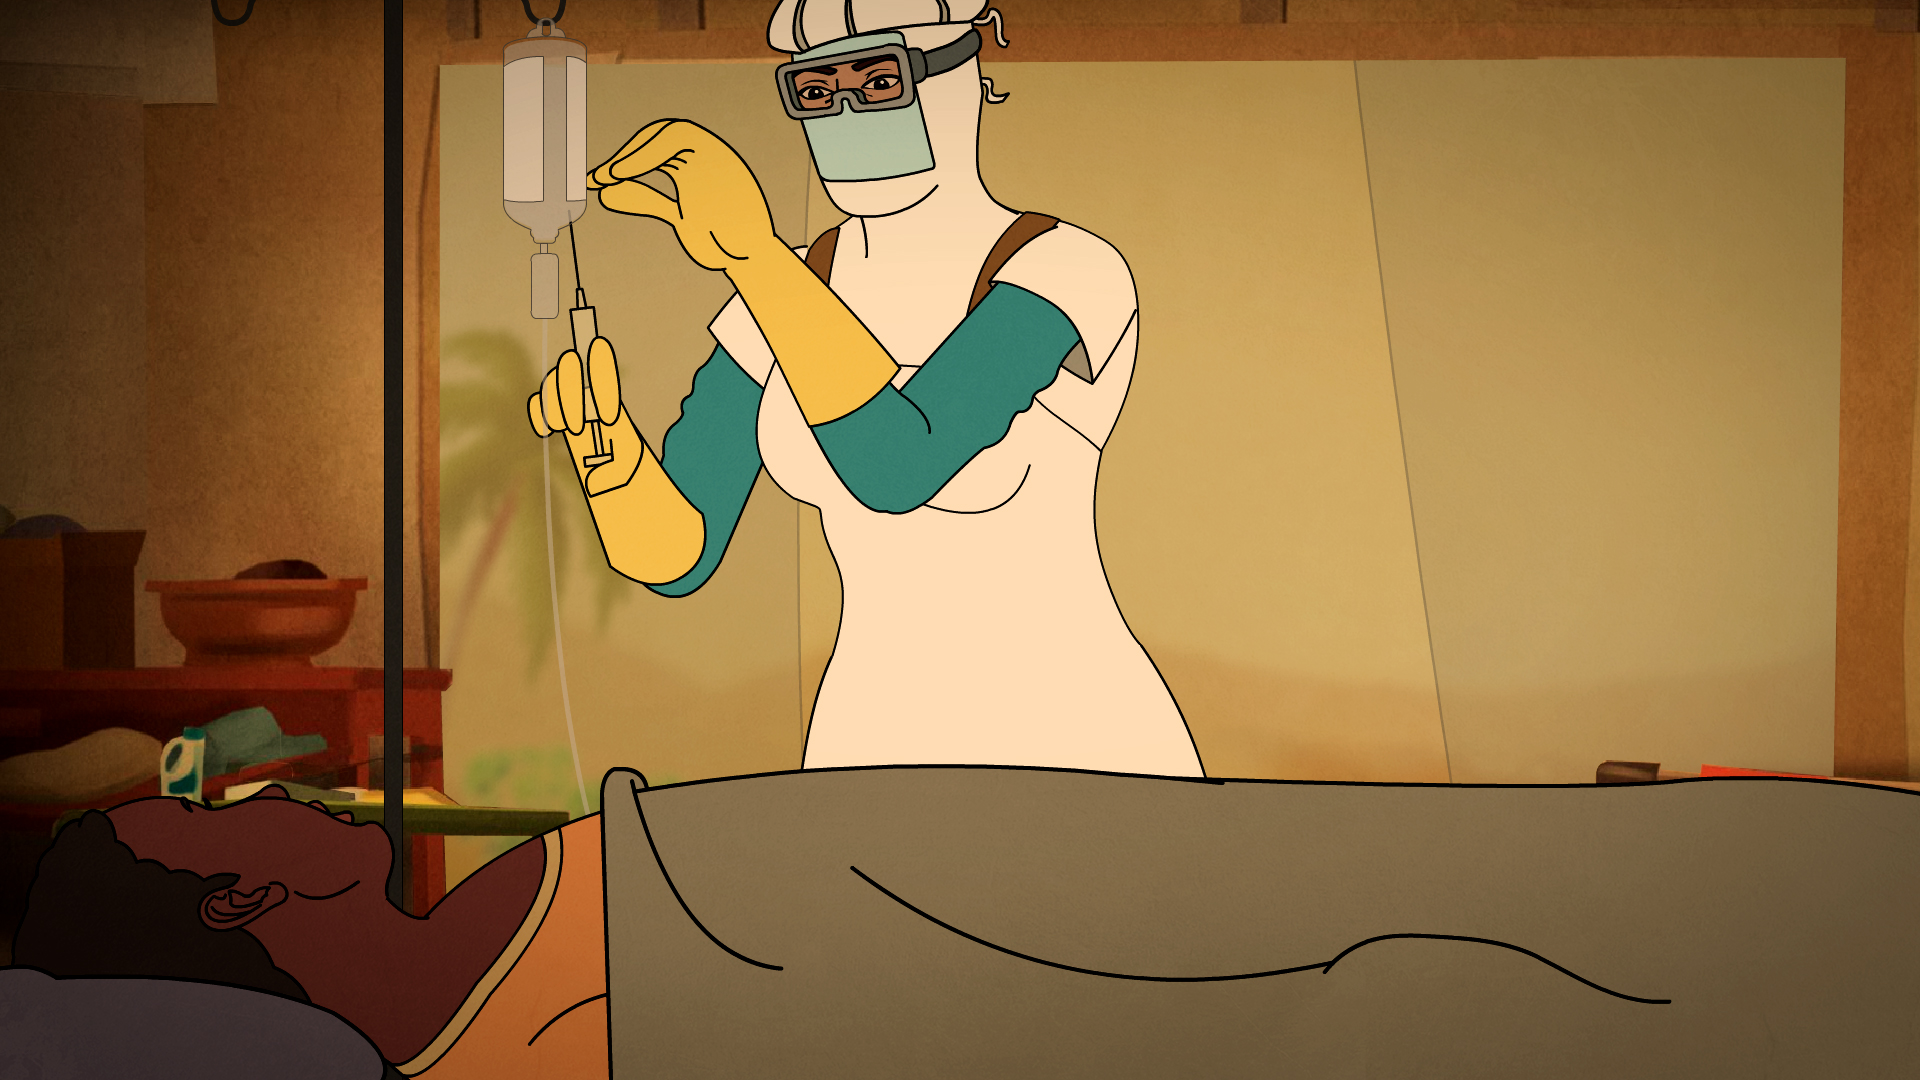 Compelling animation looks to dispel Ebola myths